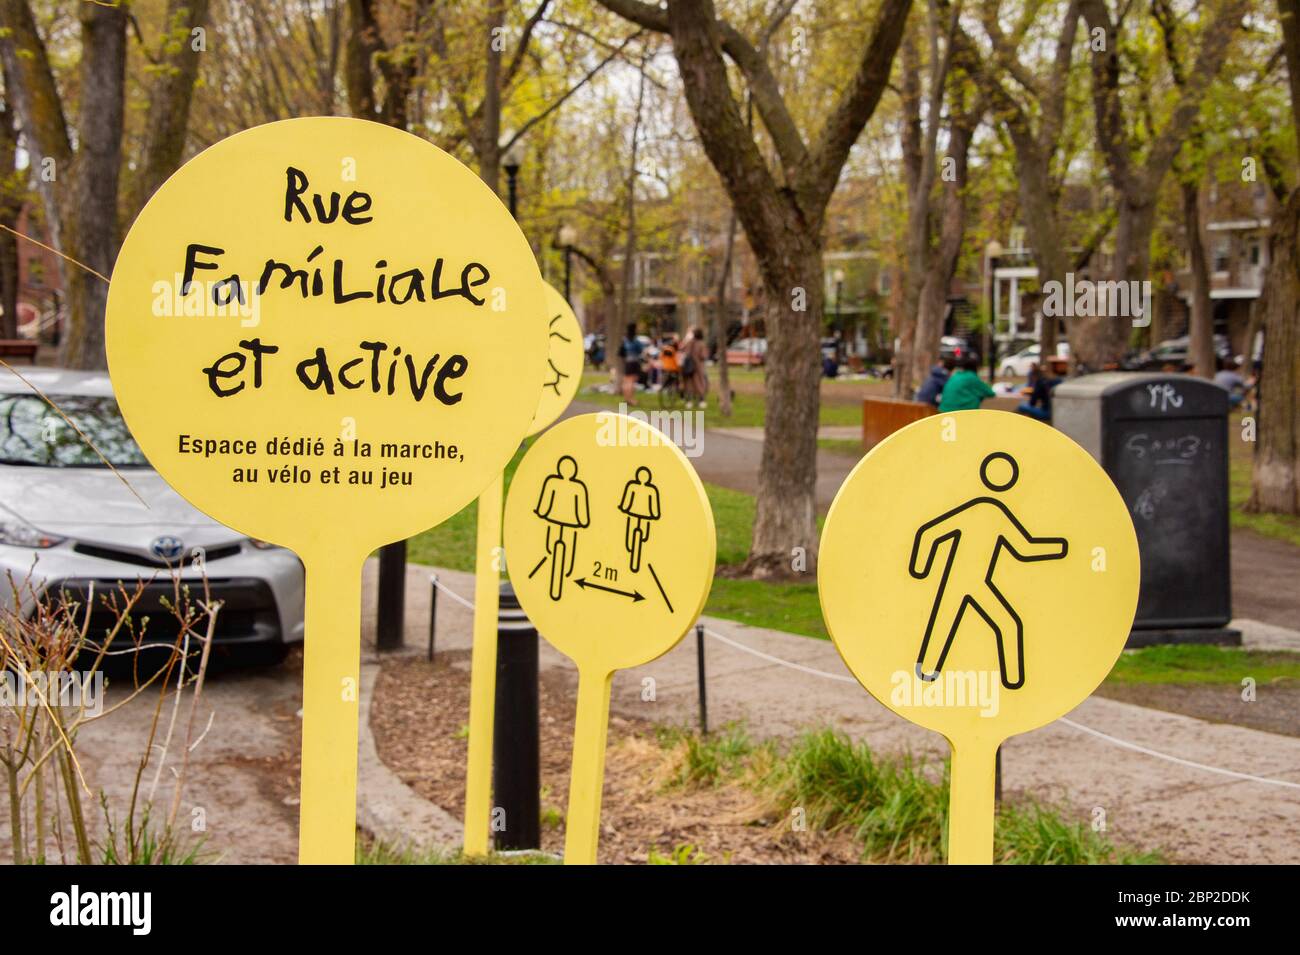 Montreal, CA - 16 May 2020: Family and active street sign in the plateau district during the Coronavirus Covid-19 pandemic. Stock Photo